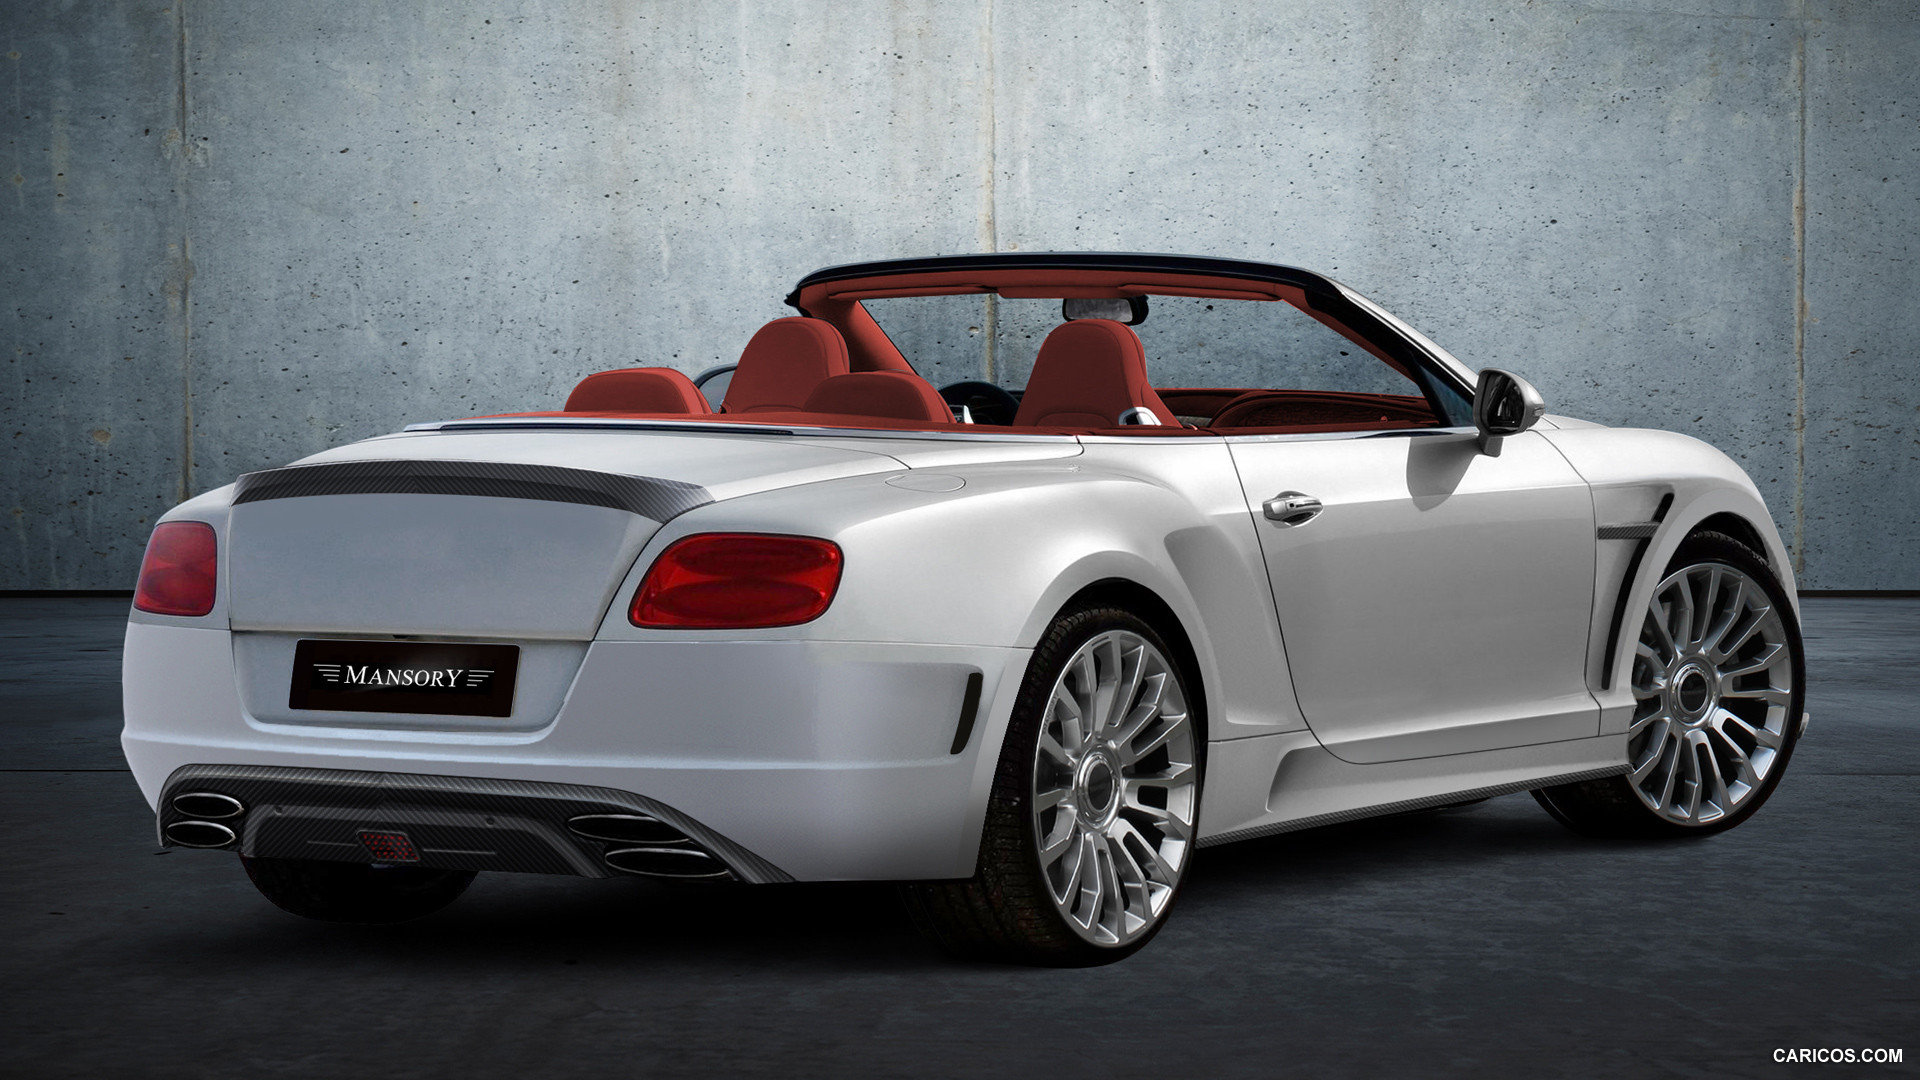 2012 Mansory Bentley Continental GTC LE MANSORY II  - Rear, #5 of 13